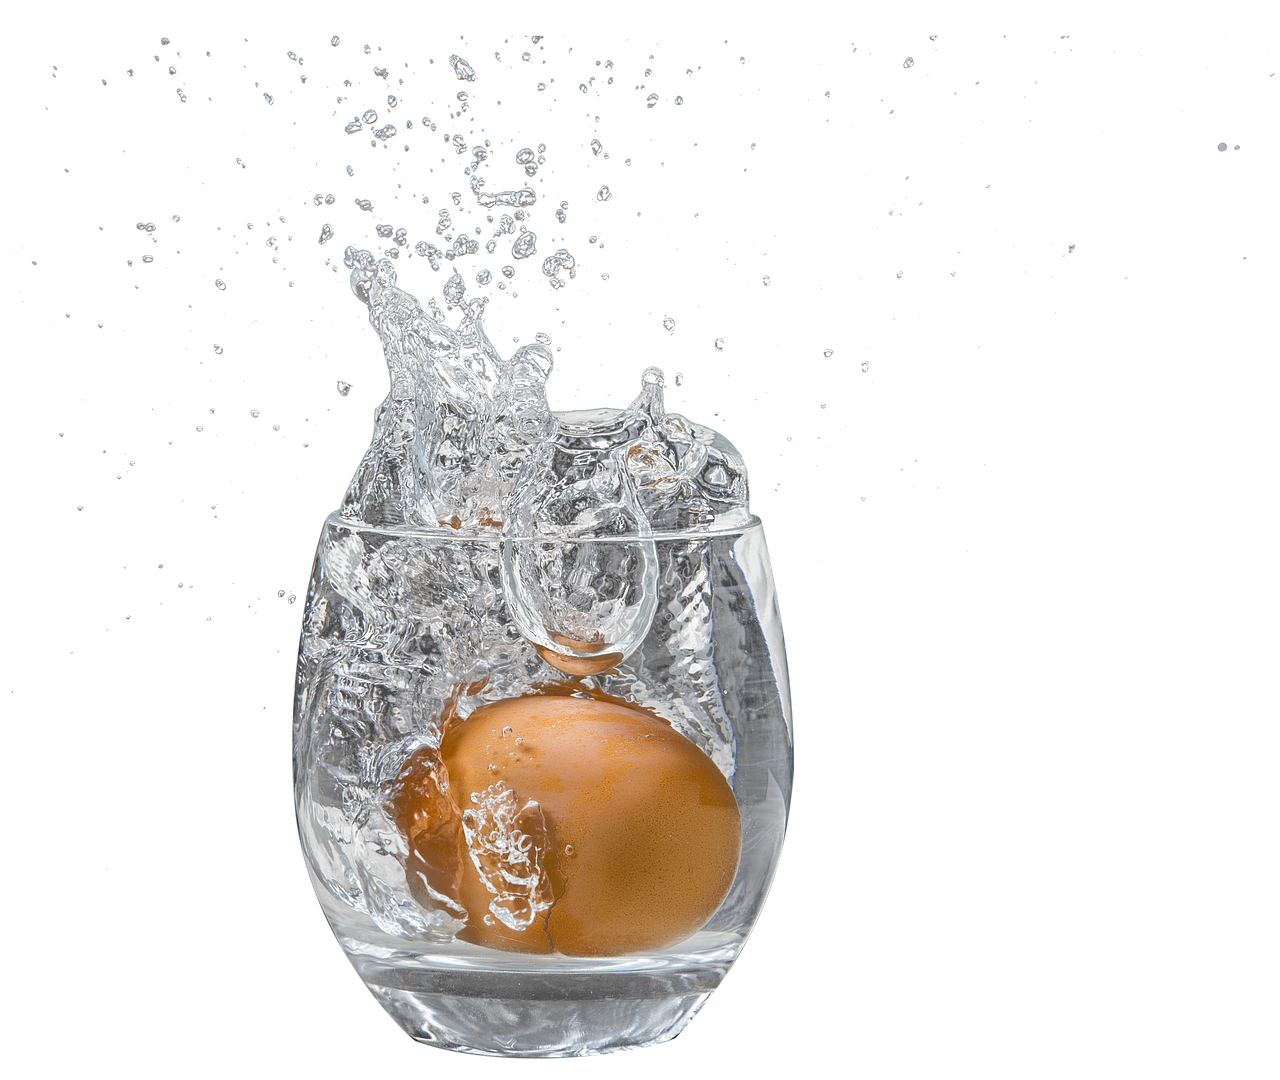 An Egg Splashing Into A Glass Of Water